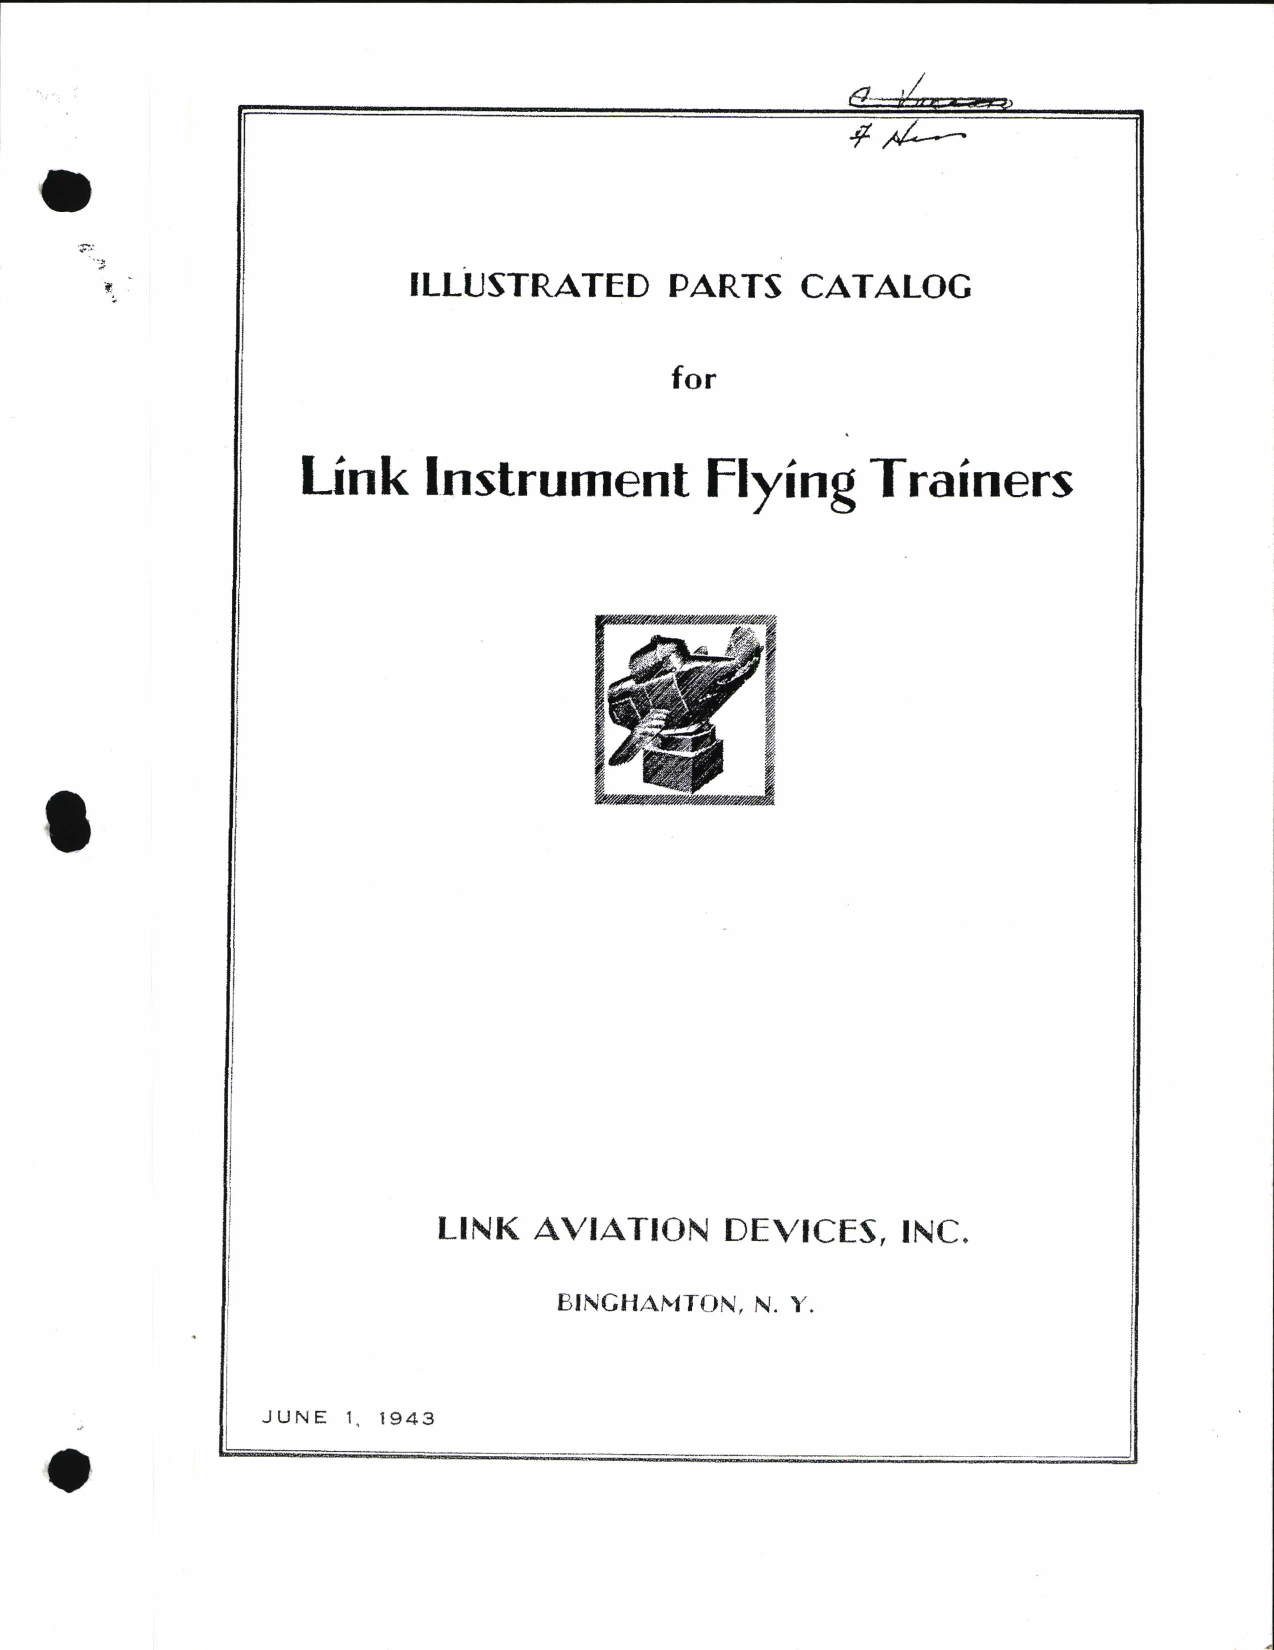 Sample page 1 from AirCorps Library document: Illustrated Parts Catalog for Link Instrument Flying Trainers